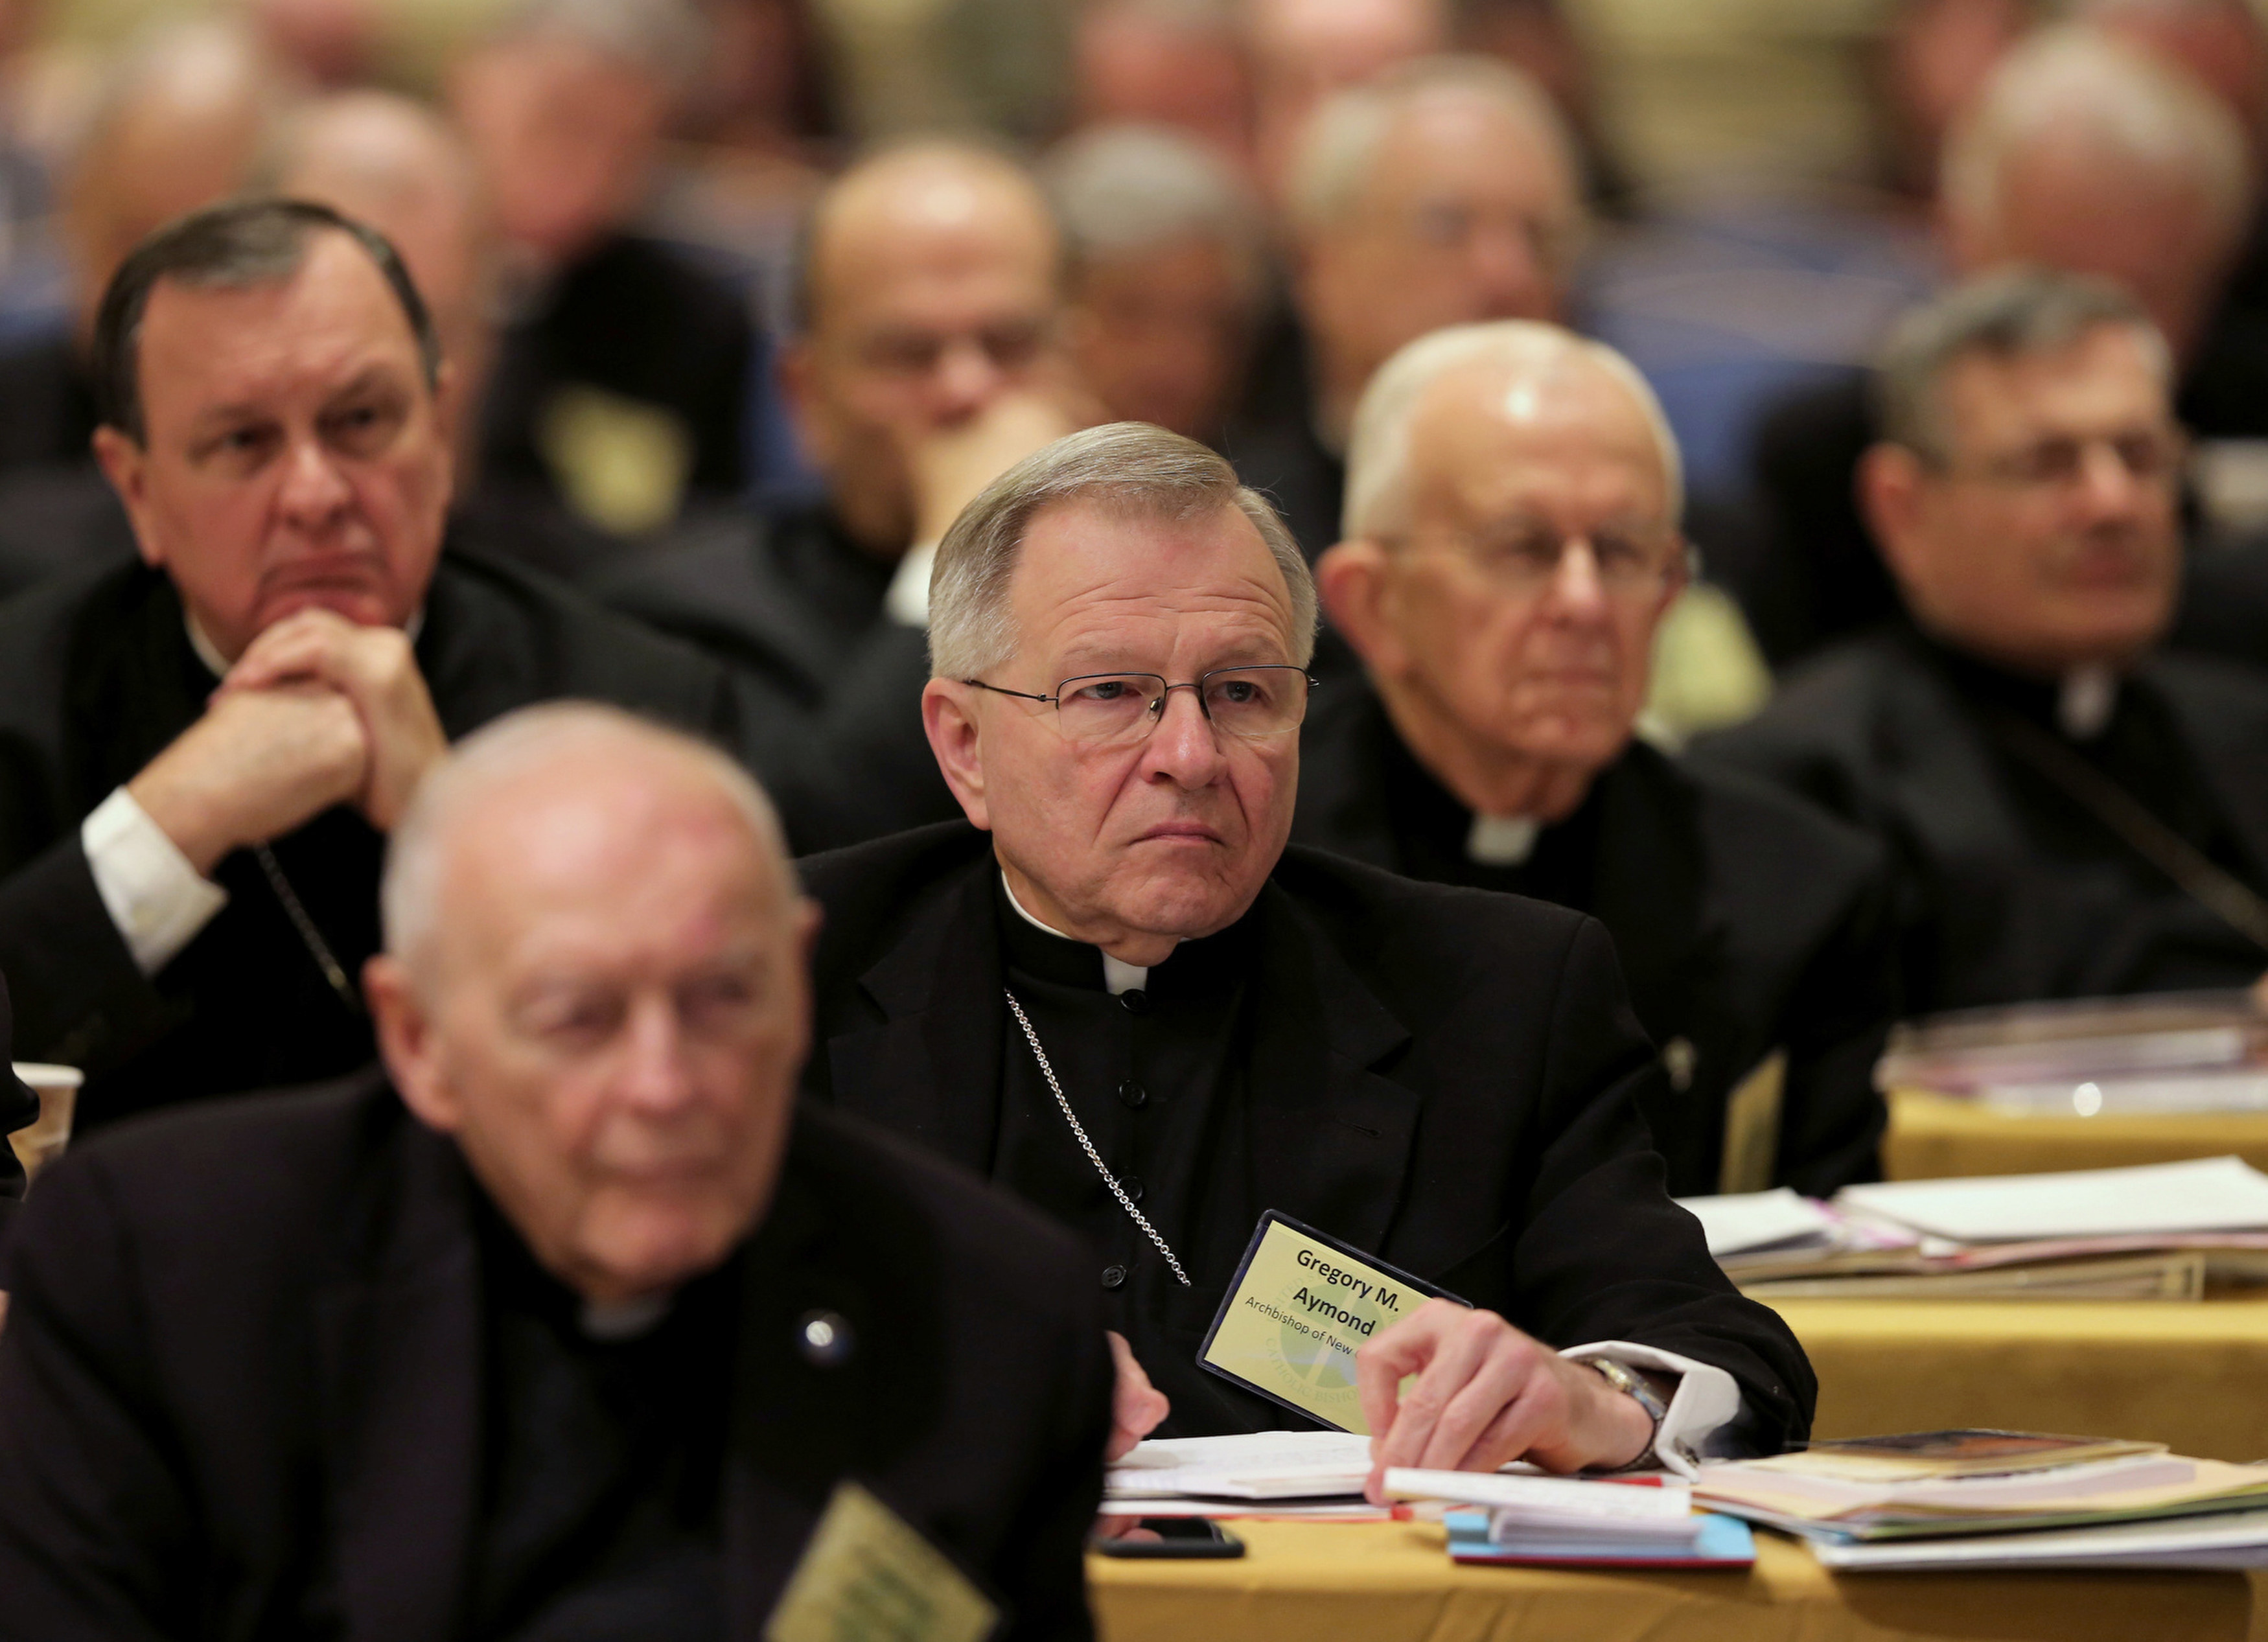 Archbishop Gregory M. Aymond of New Orleans, center, and other prelates listens to a speaker during the 2014 annual fall general assembly of the U.S. Conference of Catholic Bishops in Baltimore. (CNS/Bob Roller)